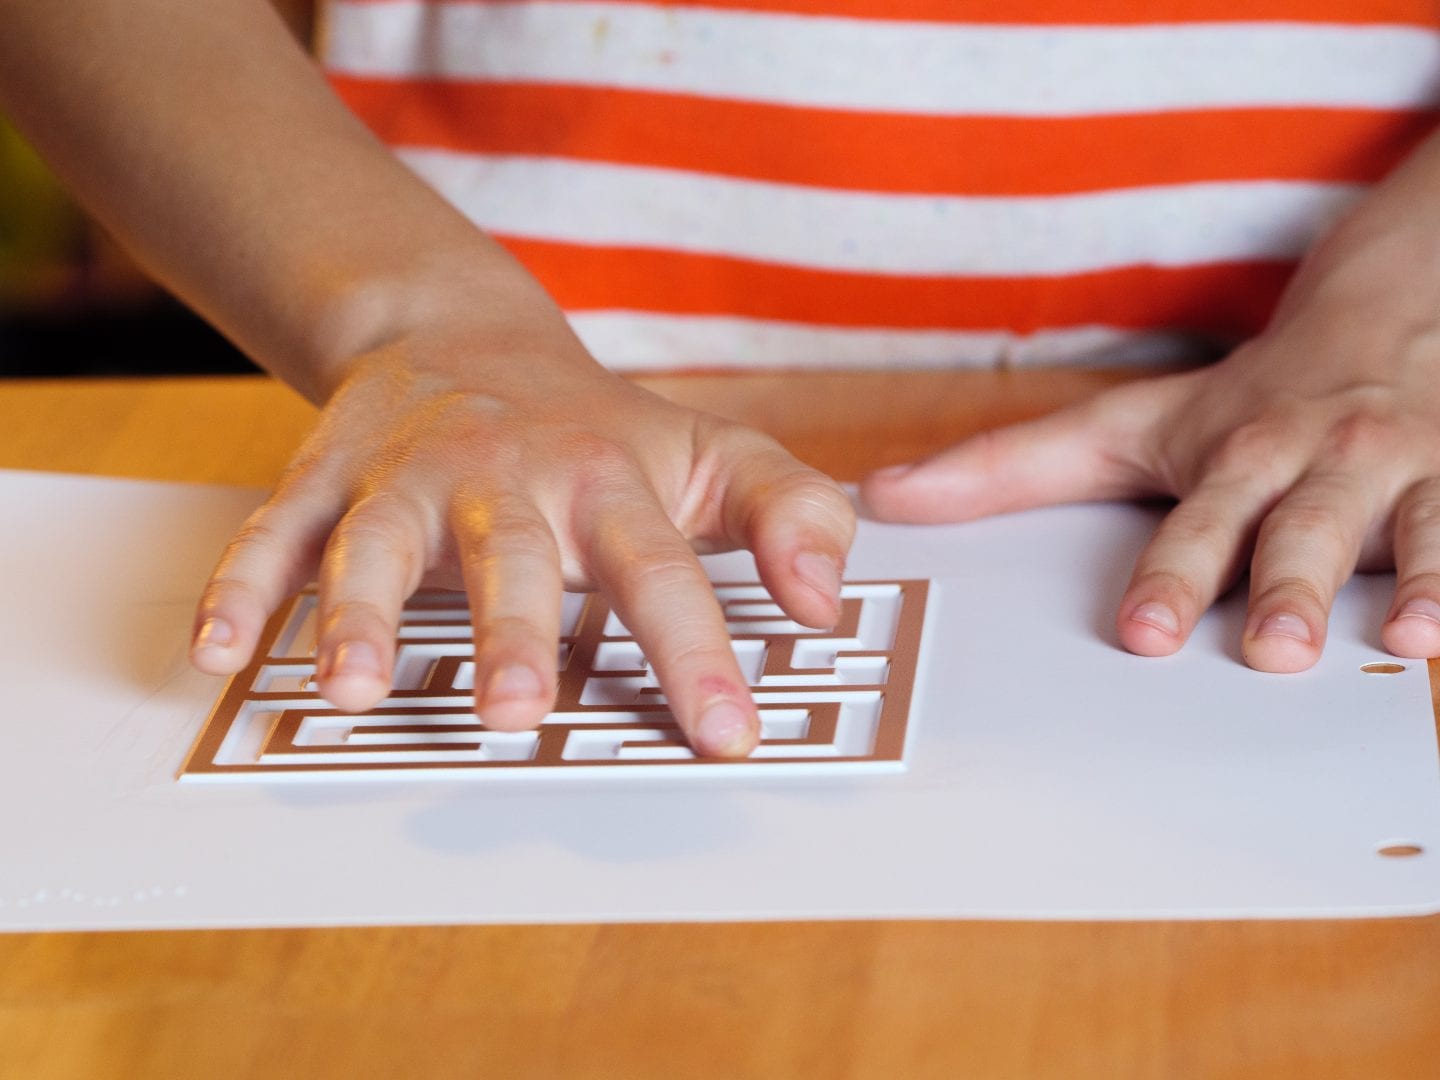 A child standing at a table with one of their hands exploring a Finger Walks tactile labyrinth.